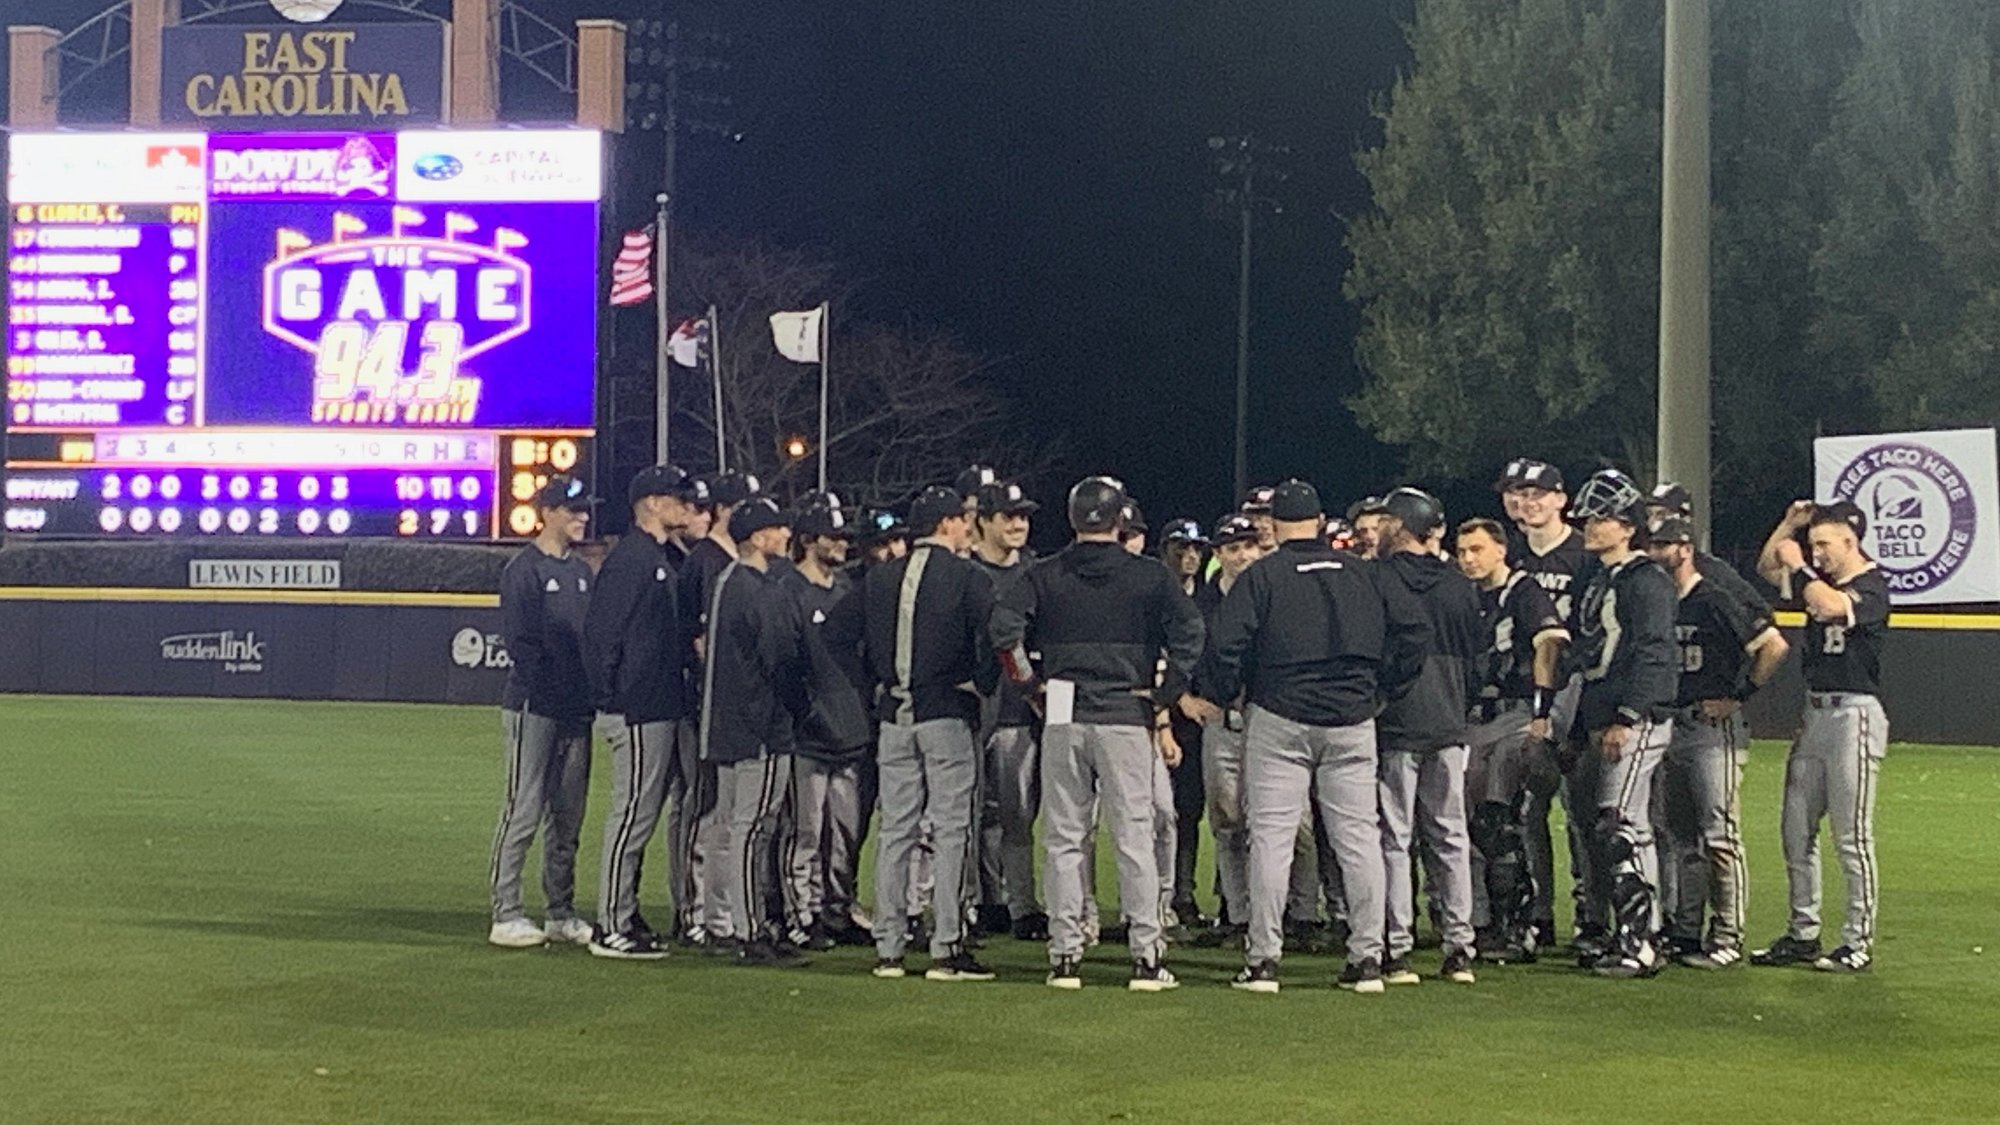 Bryant downs No. 12 East Carolina, 10-2, on Opening Day